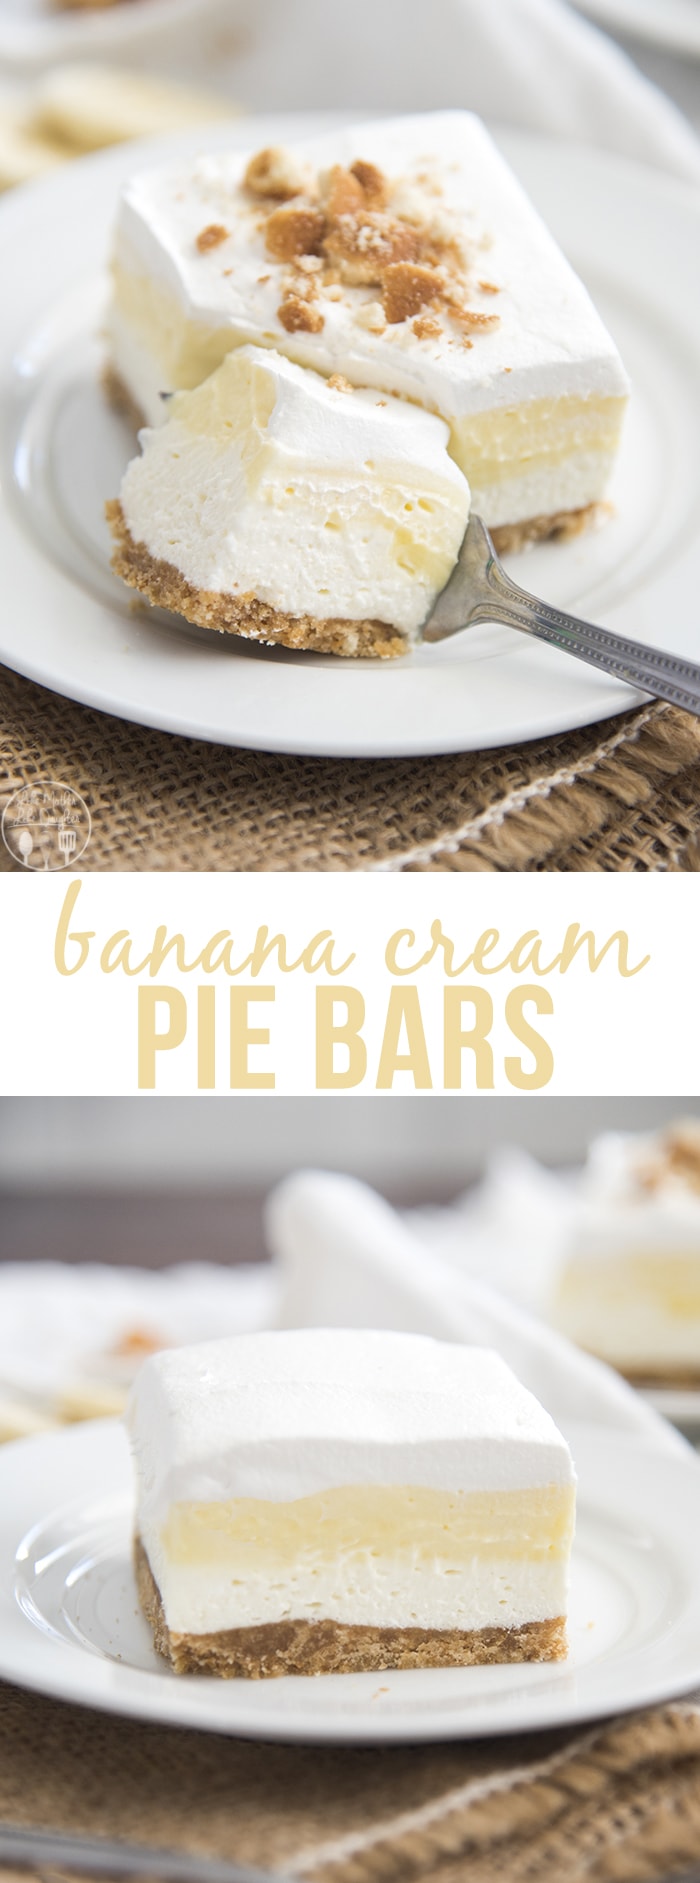 A collage of two photos of banana cream pie bars with a text block in the middle.